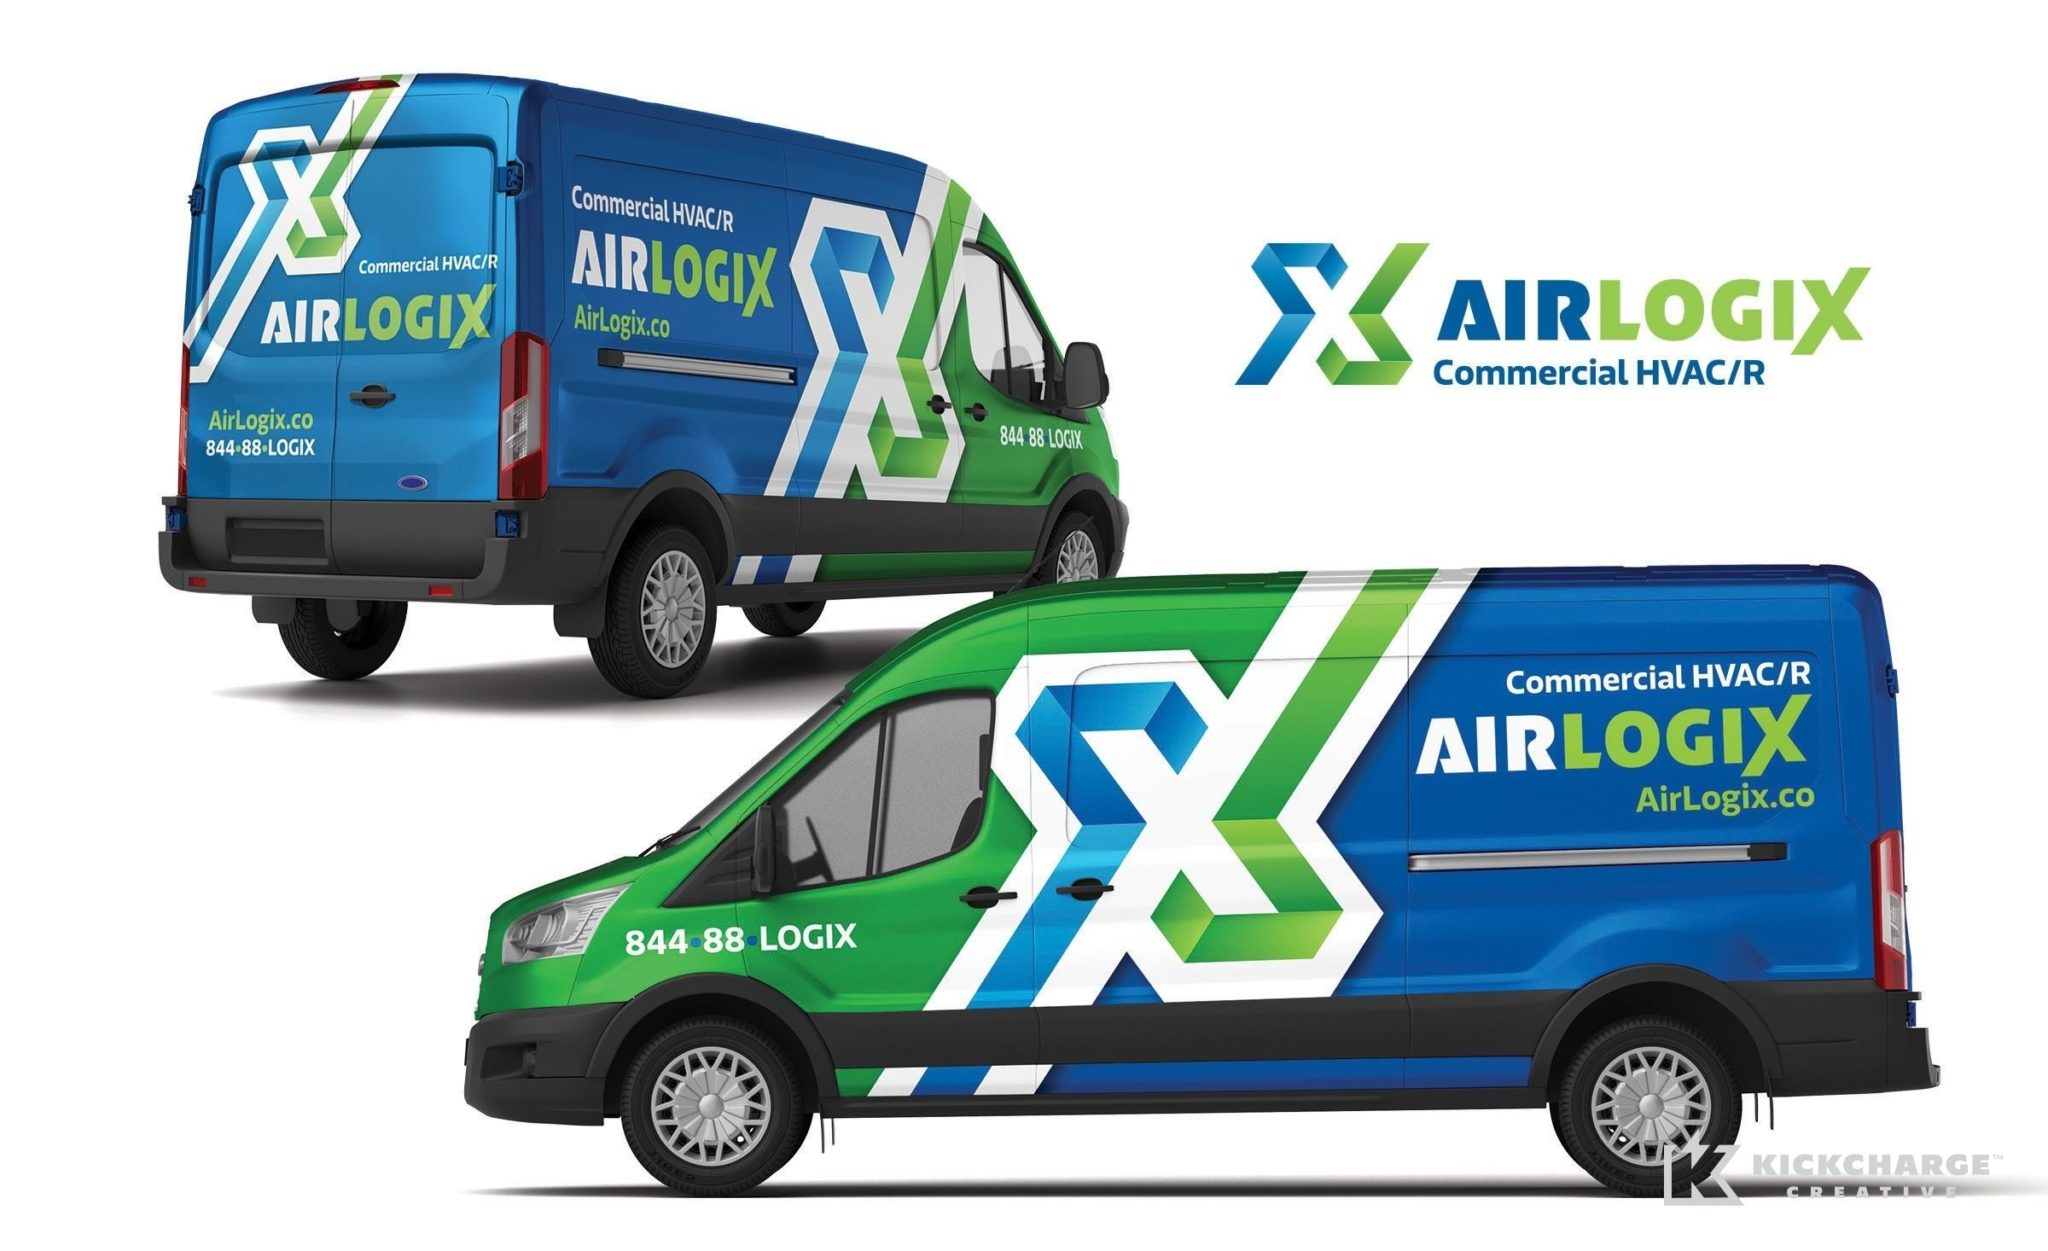 Vehicle wrap design for AirLogix, a commercial HVAC/R company in Astoria, NY.